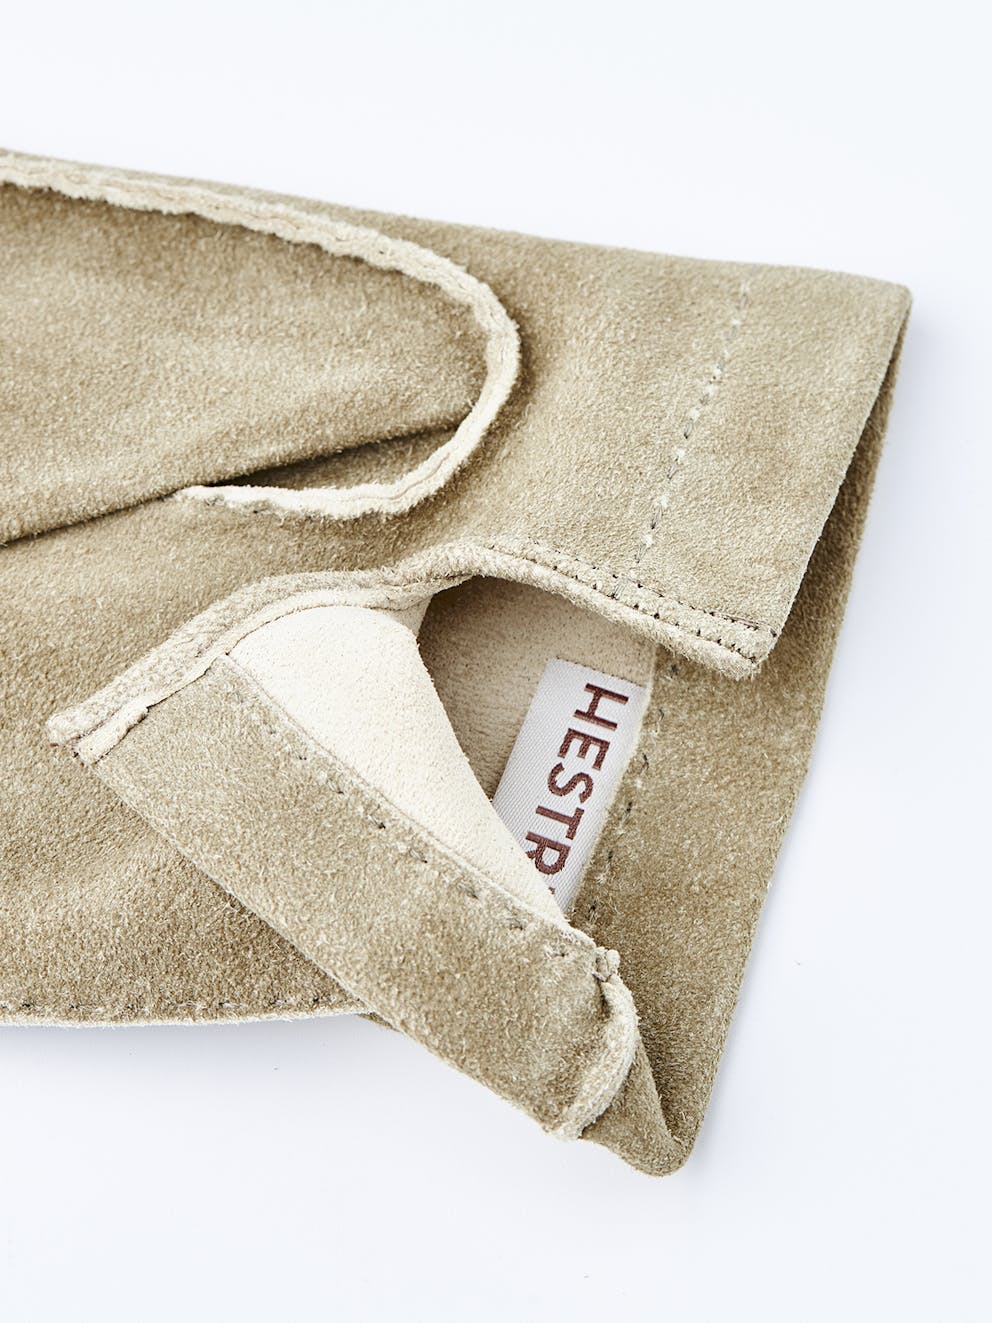 | Unlined Chamois - Hestra Handsewn Sand Gloves